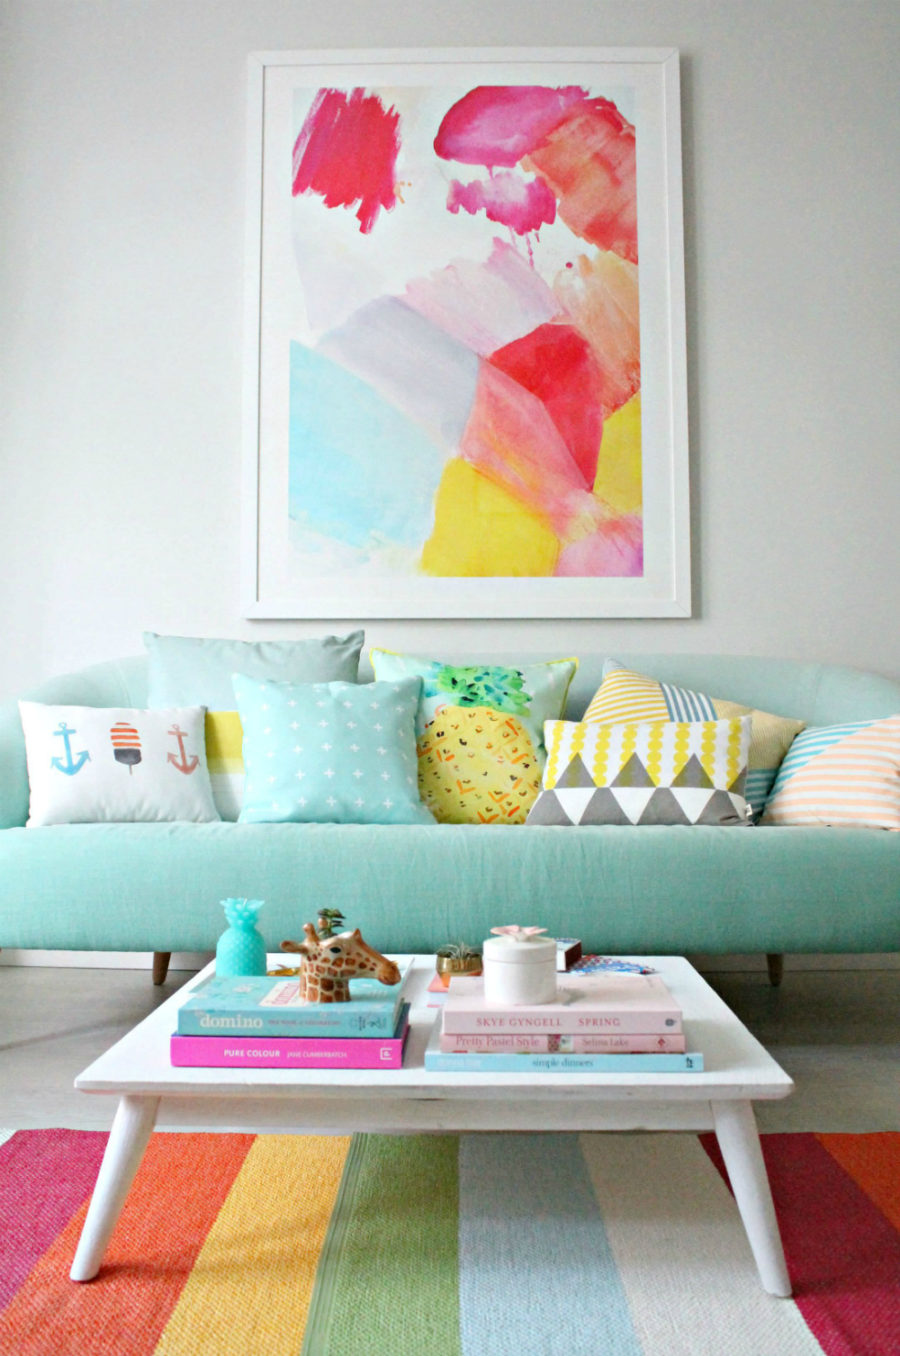 Pastel Aesthetic: 21 Pastel Colour Decorating Ideas For The Home